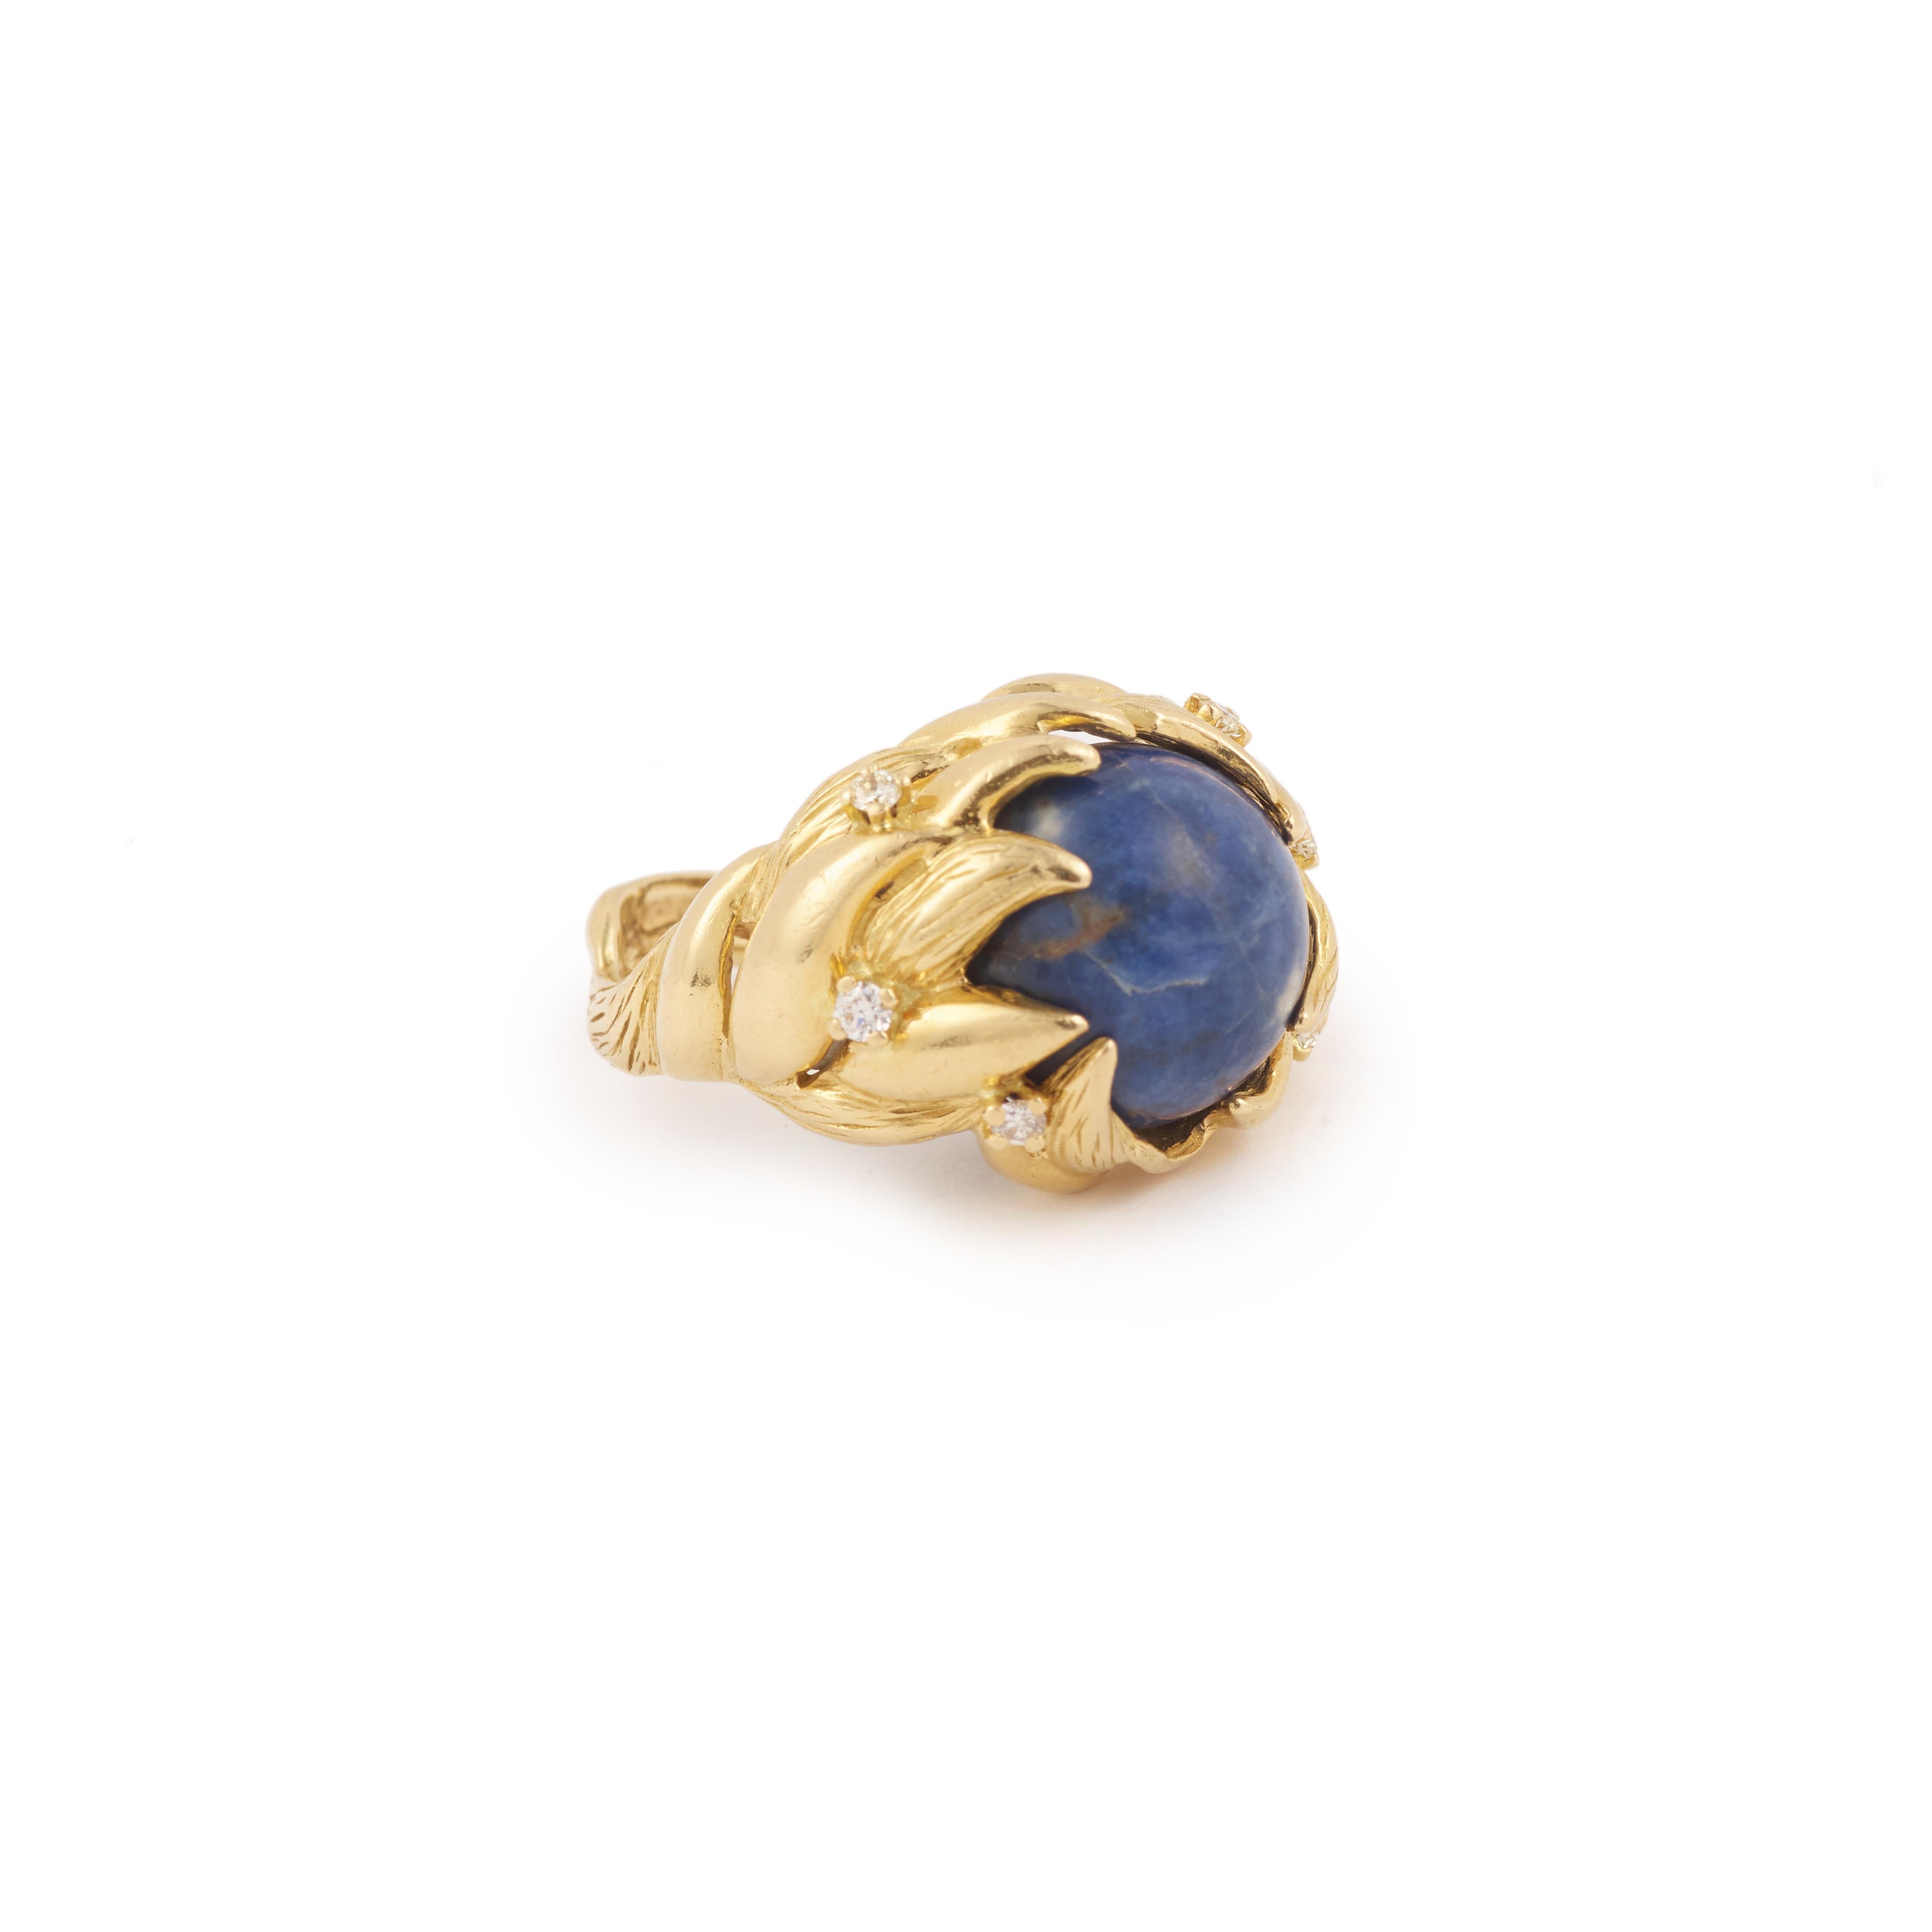 Famous ring signed Gilbert Albert in yellow gold enhanced with diamonds and adorned in the center of a ball of gemstone changeable according to your desires.

12 balls are provided : hematite, carnelian, tiger eye, snow obsidian, sodalite, ivory,